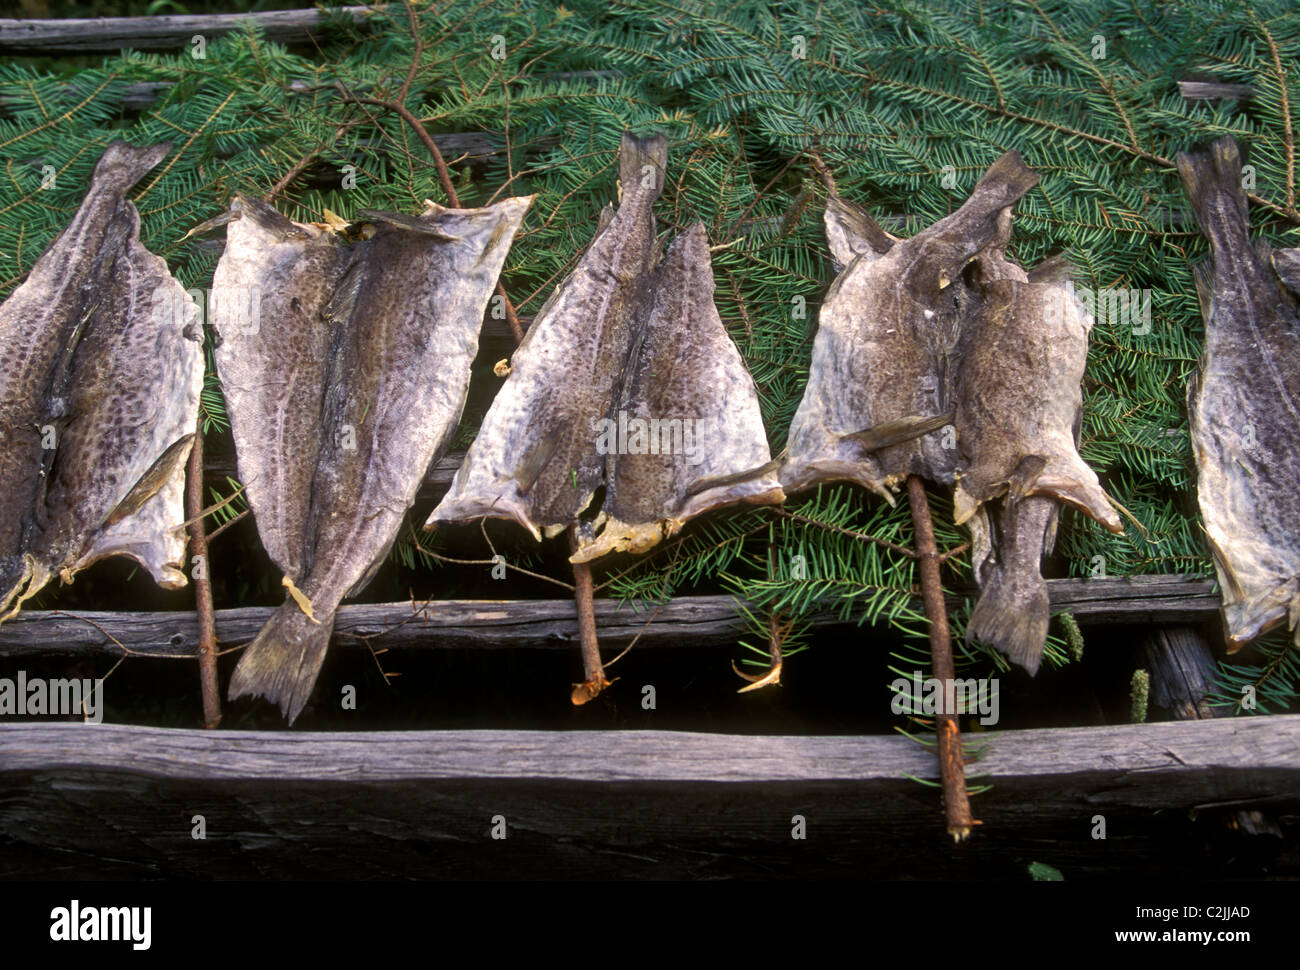 drying codfish, salted fish, salted food, food preservation, Acadian Historical Village, near town of Caraquet, New Brunswick Province, Canada Stock Photo